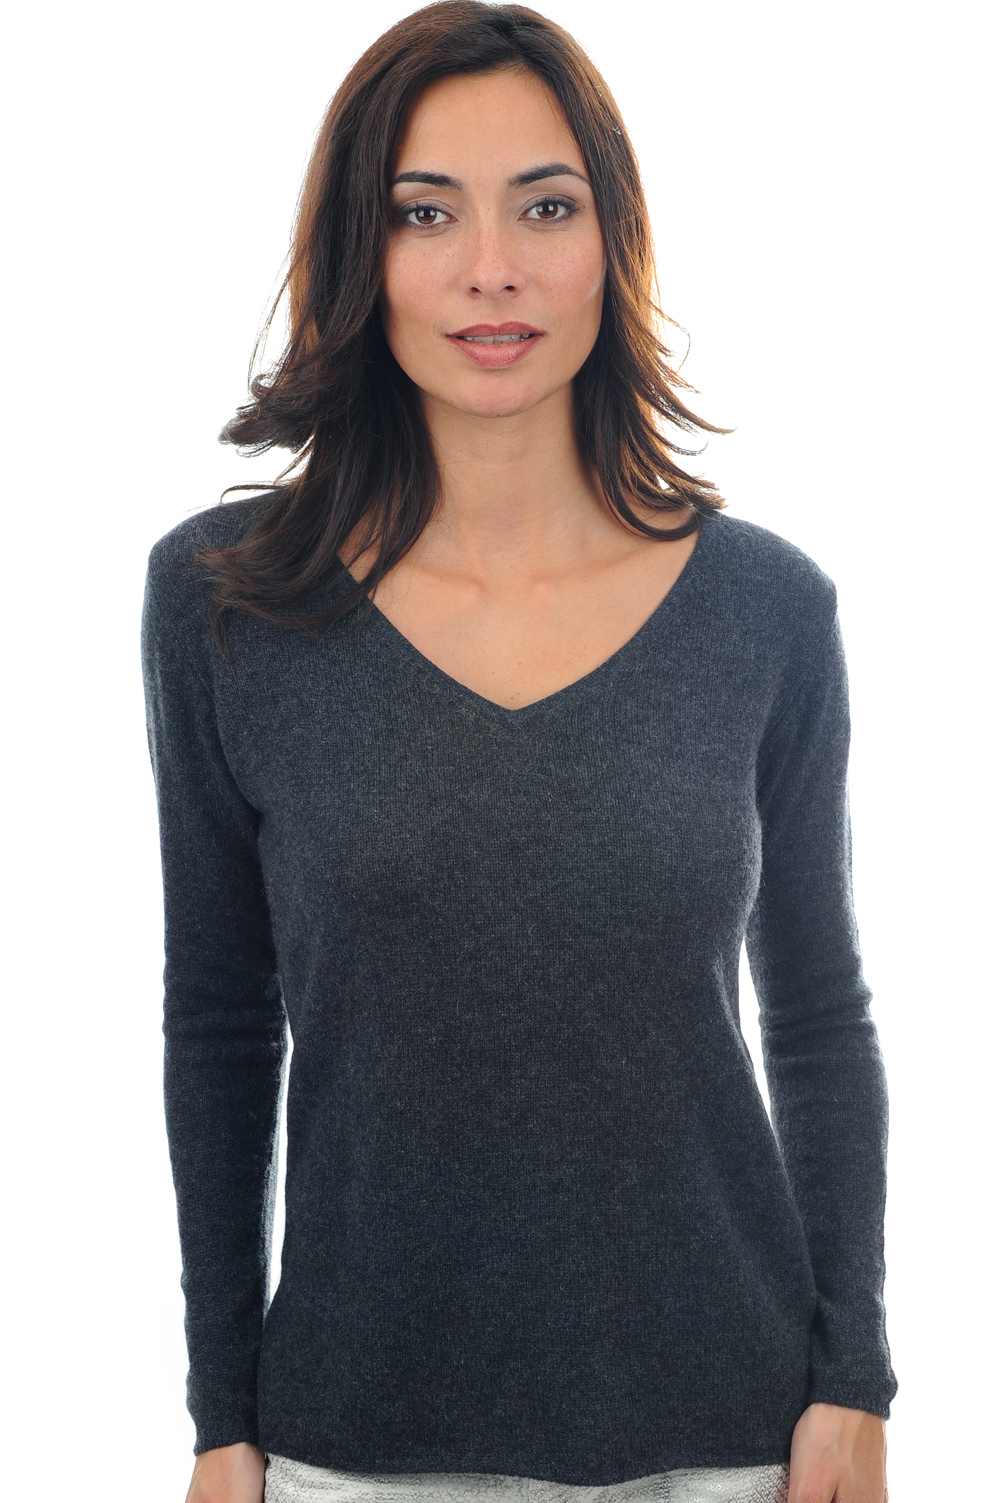 Cashmere ladies basic sweaters at low prices flavie charcoal marl l